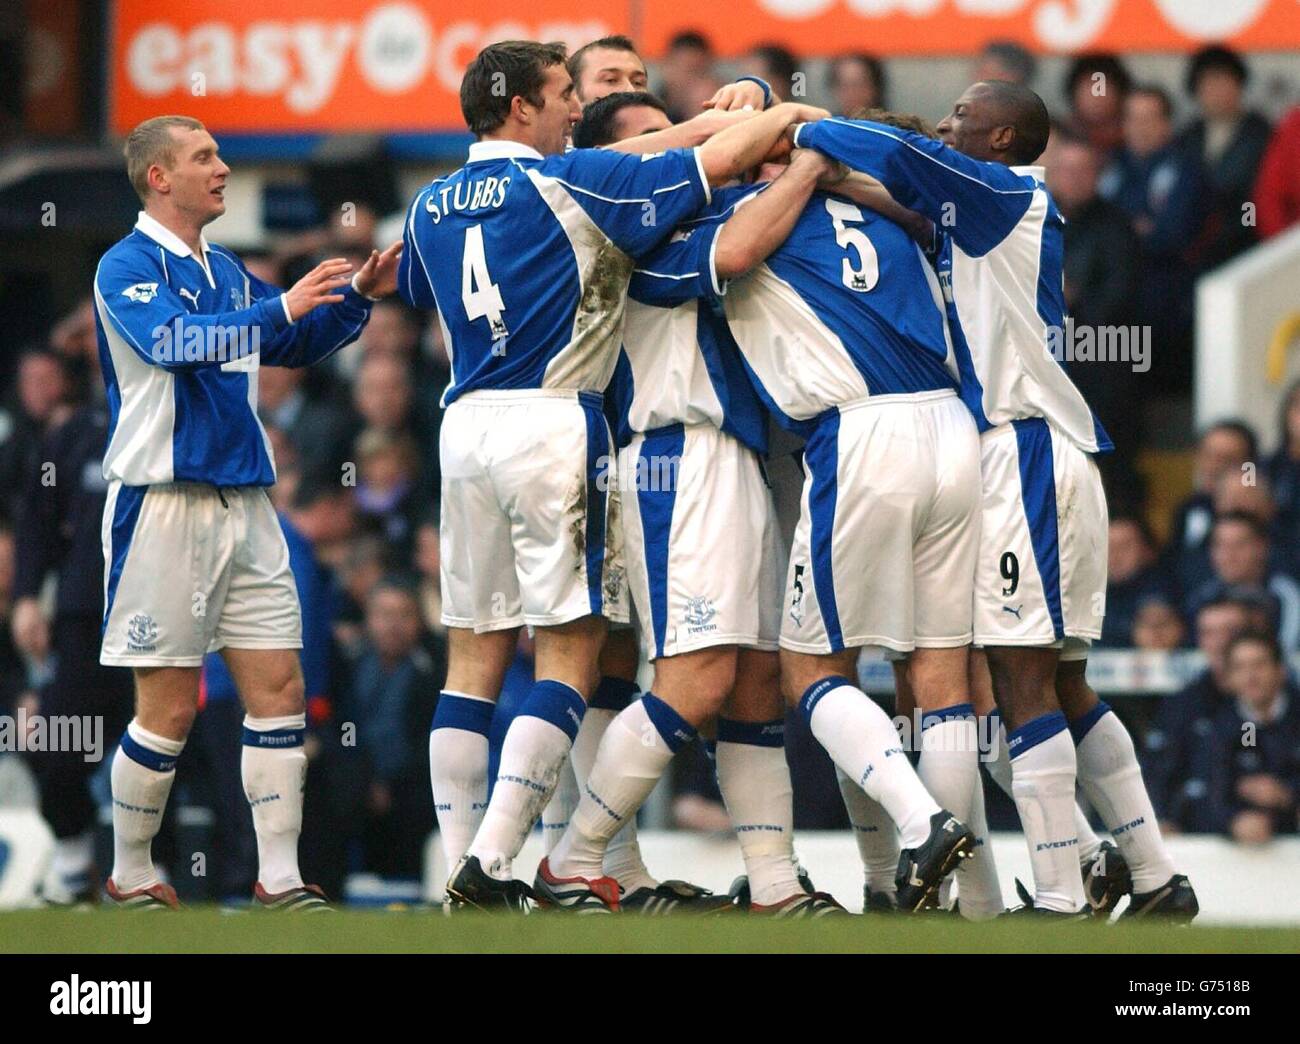 Everton's David Weir (number 5) is smothered by teammates after equalising against Spurs during their Premiership clash at White Hart Lane, London, today, Saturday 19 January 2002. It ended a 1-1 draw. Stock Photo